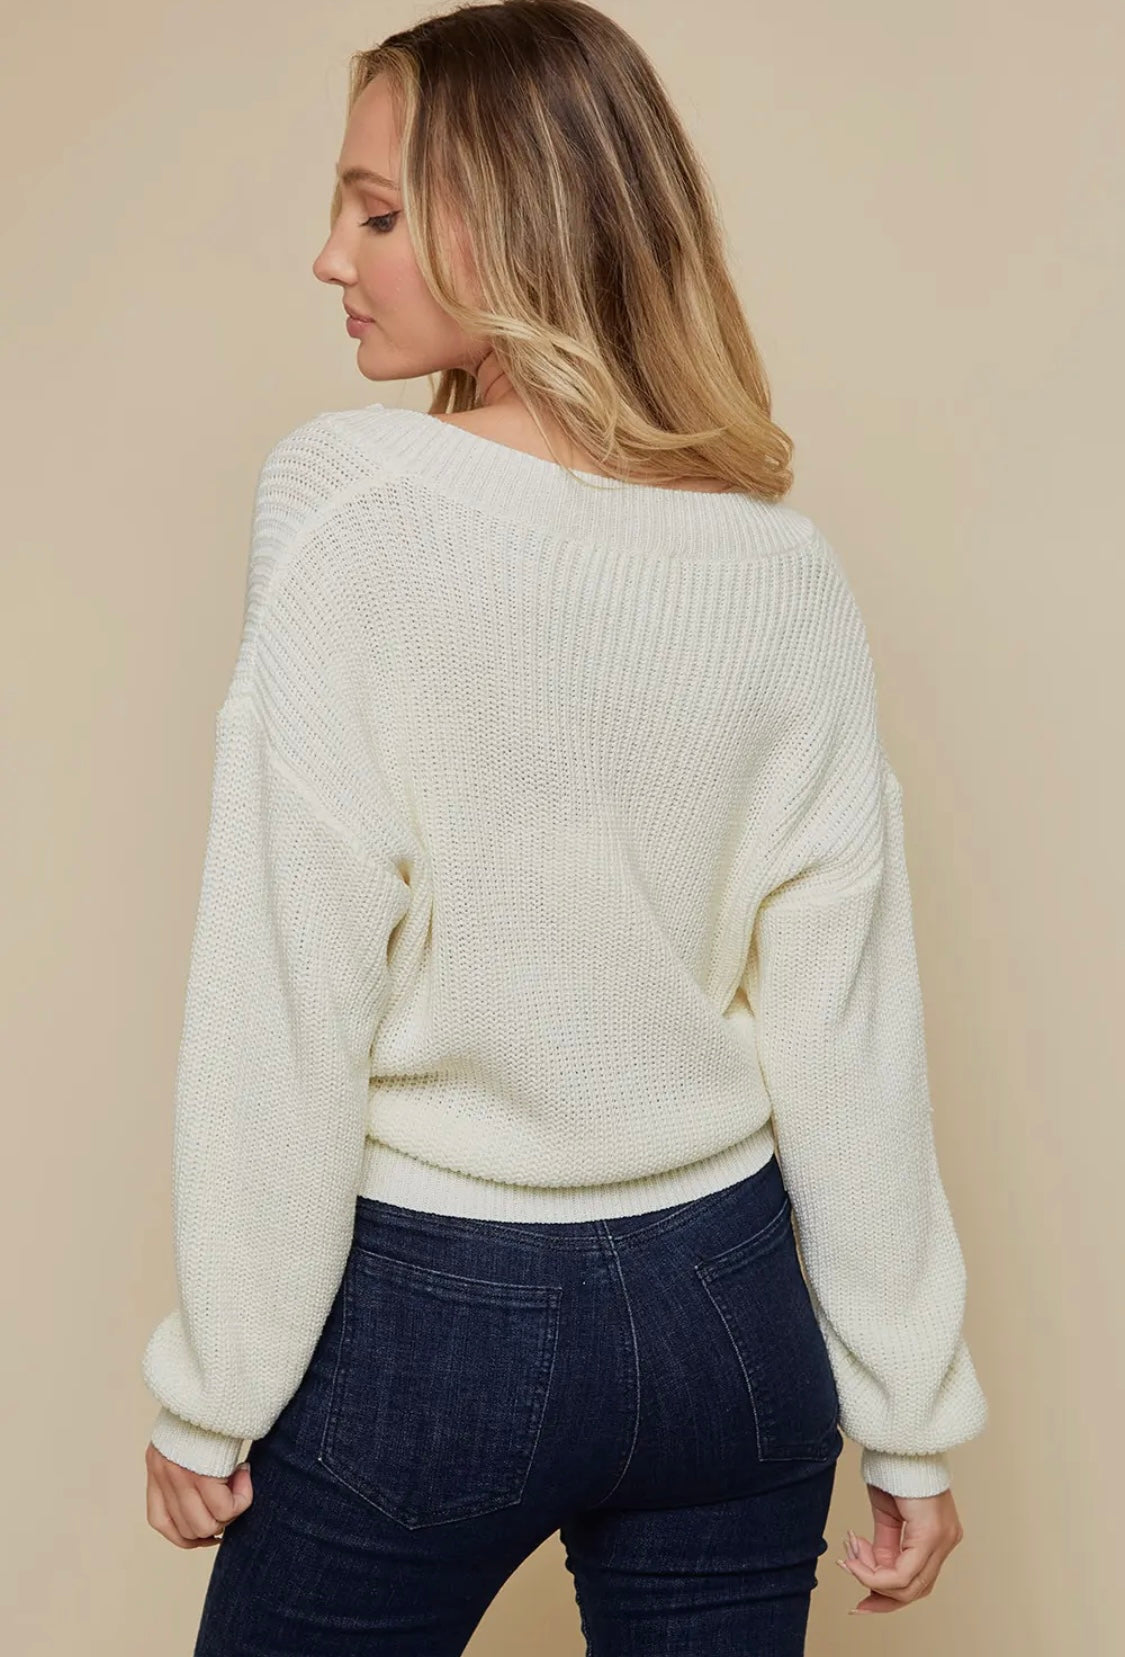 The Isabella Knit Sweater